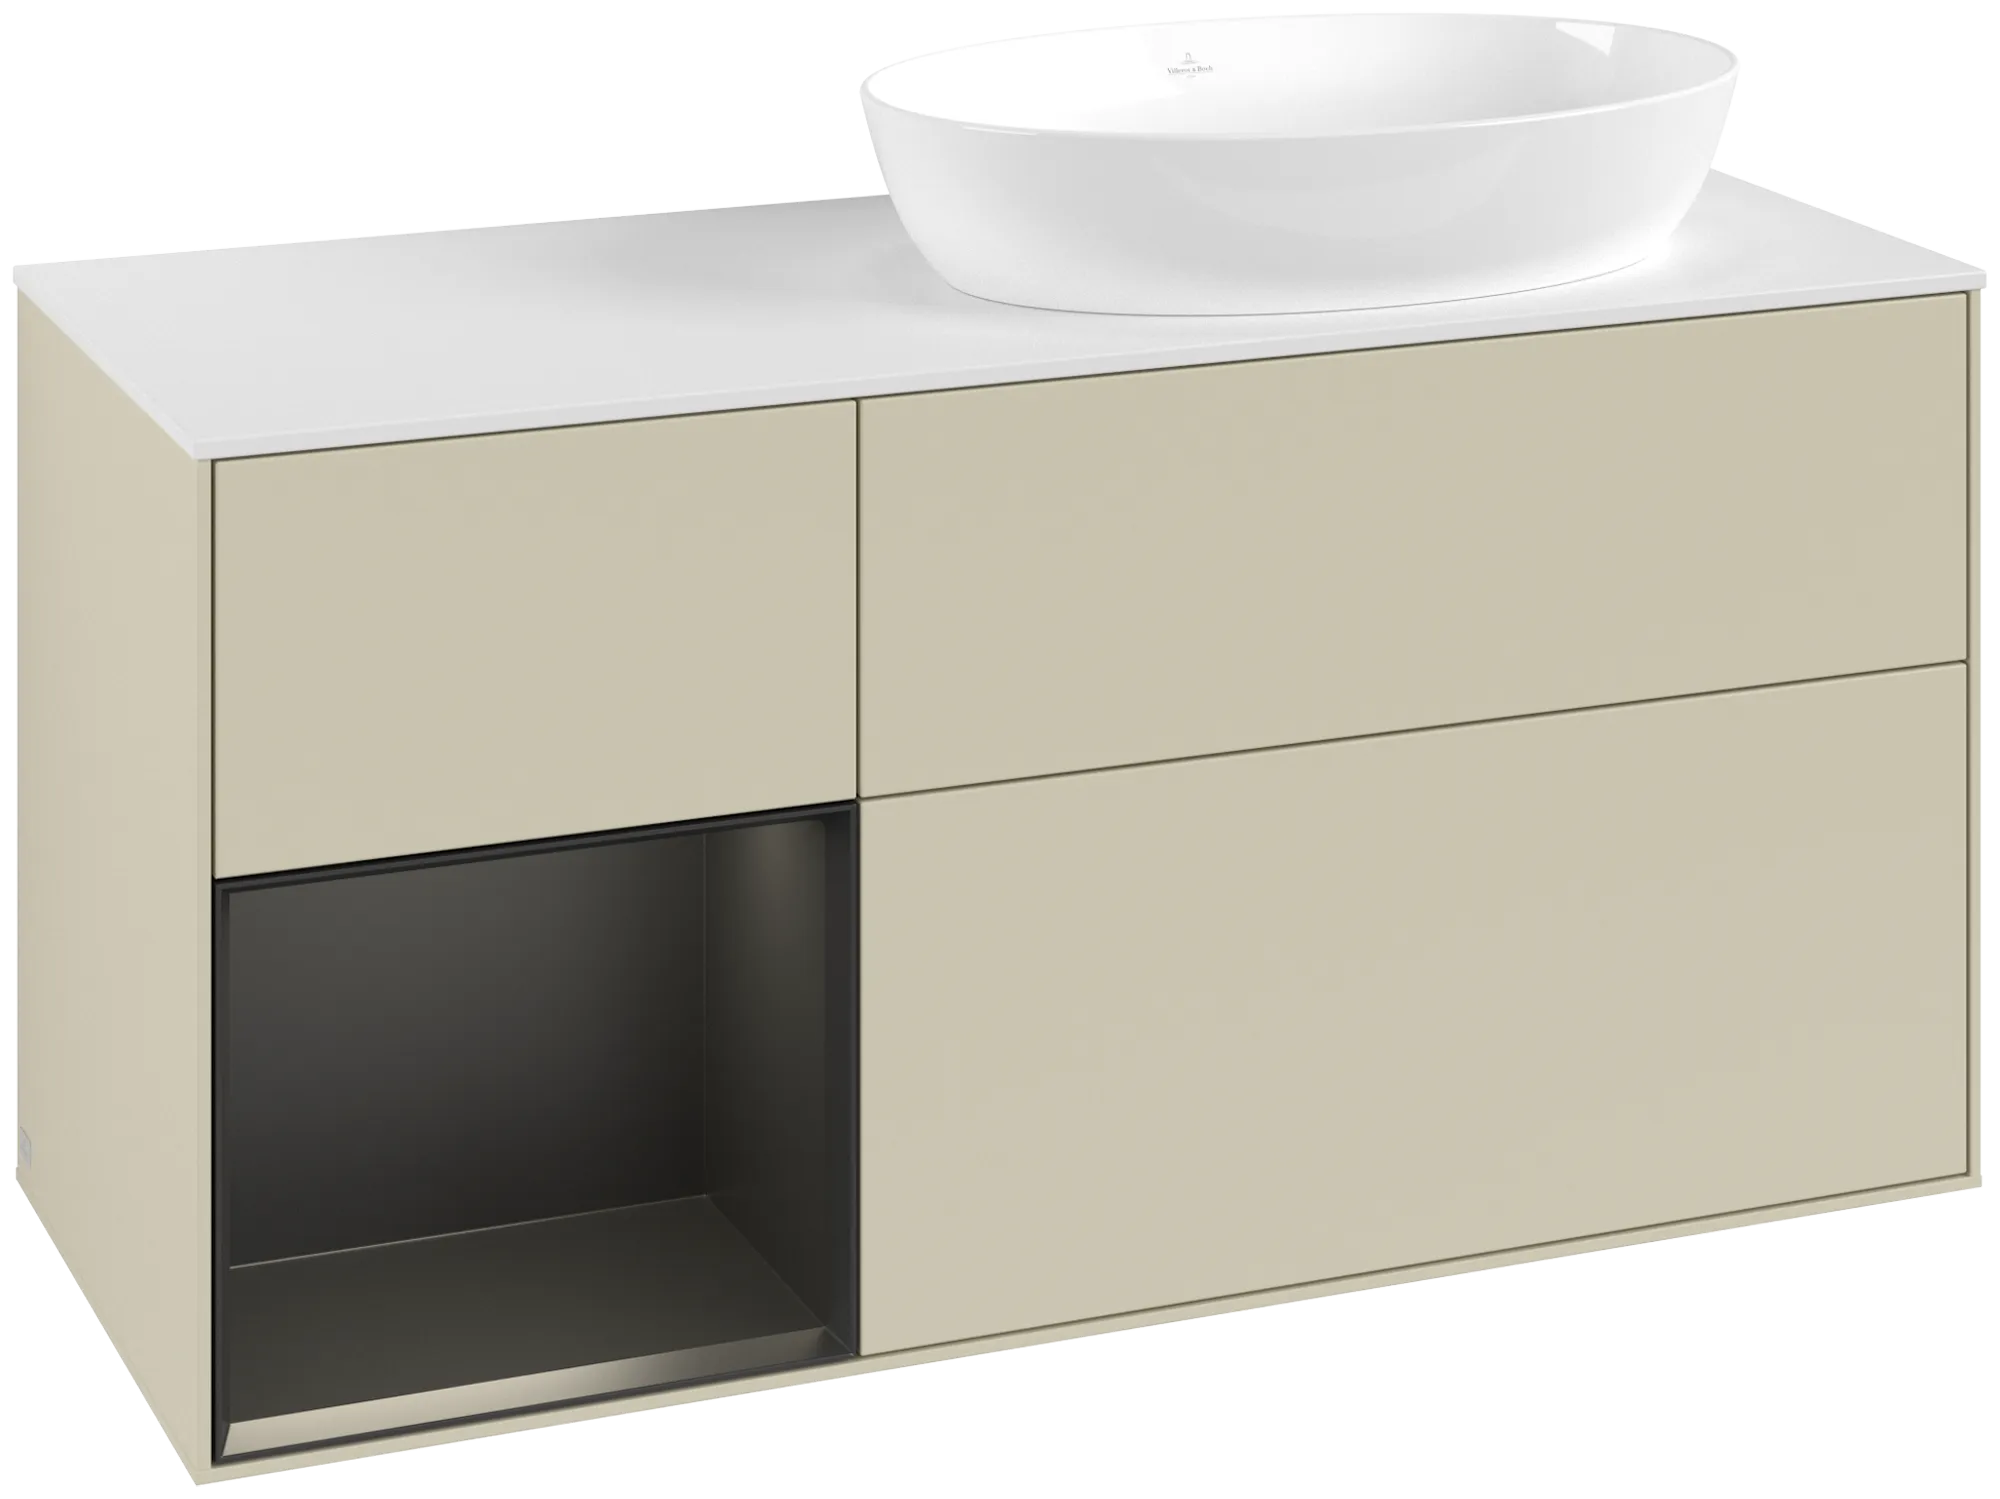 Picture of VILLEROY BOCH Finion Vanity unit, with lighting, 3 pull-out compartments, 1200 x 603 x 501 mm, Silk Grey Matt Lacquer / Black Matt Lacquer / Glass White Matt #GA41PDHJ